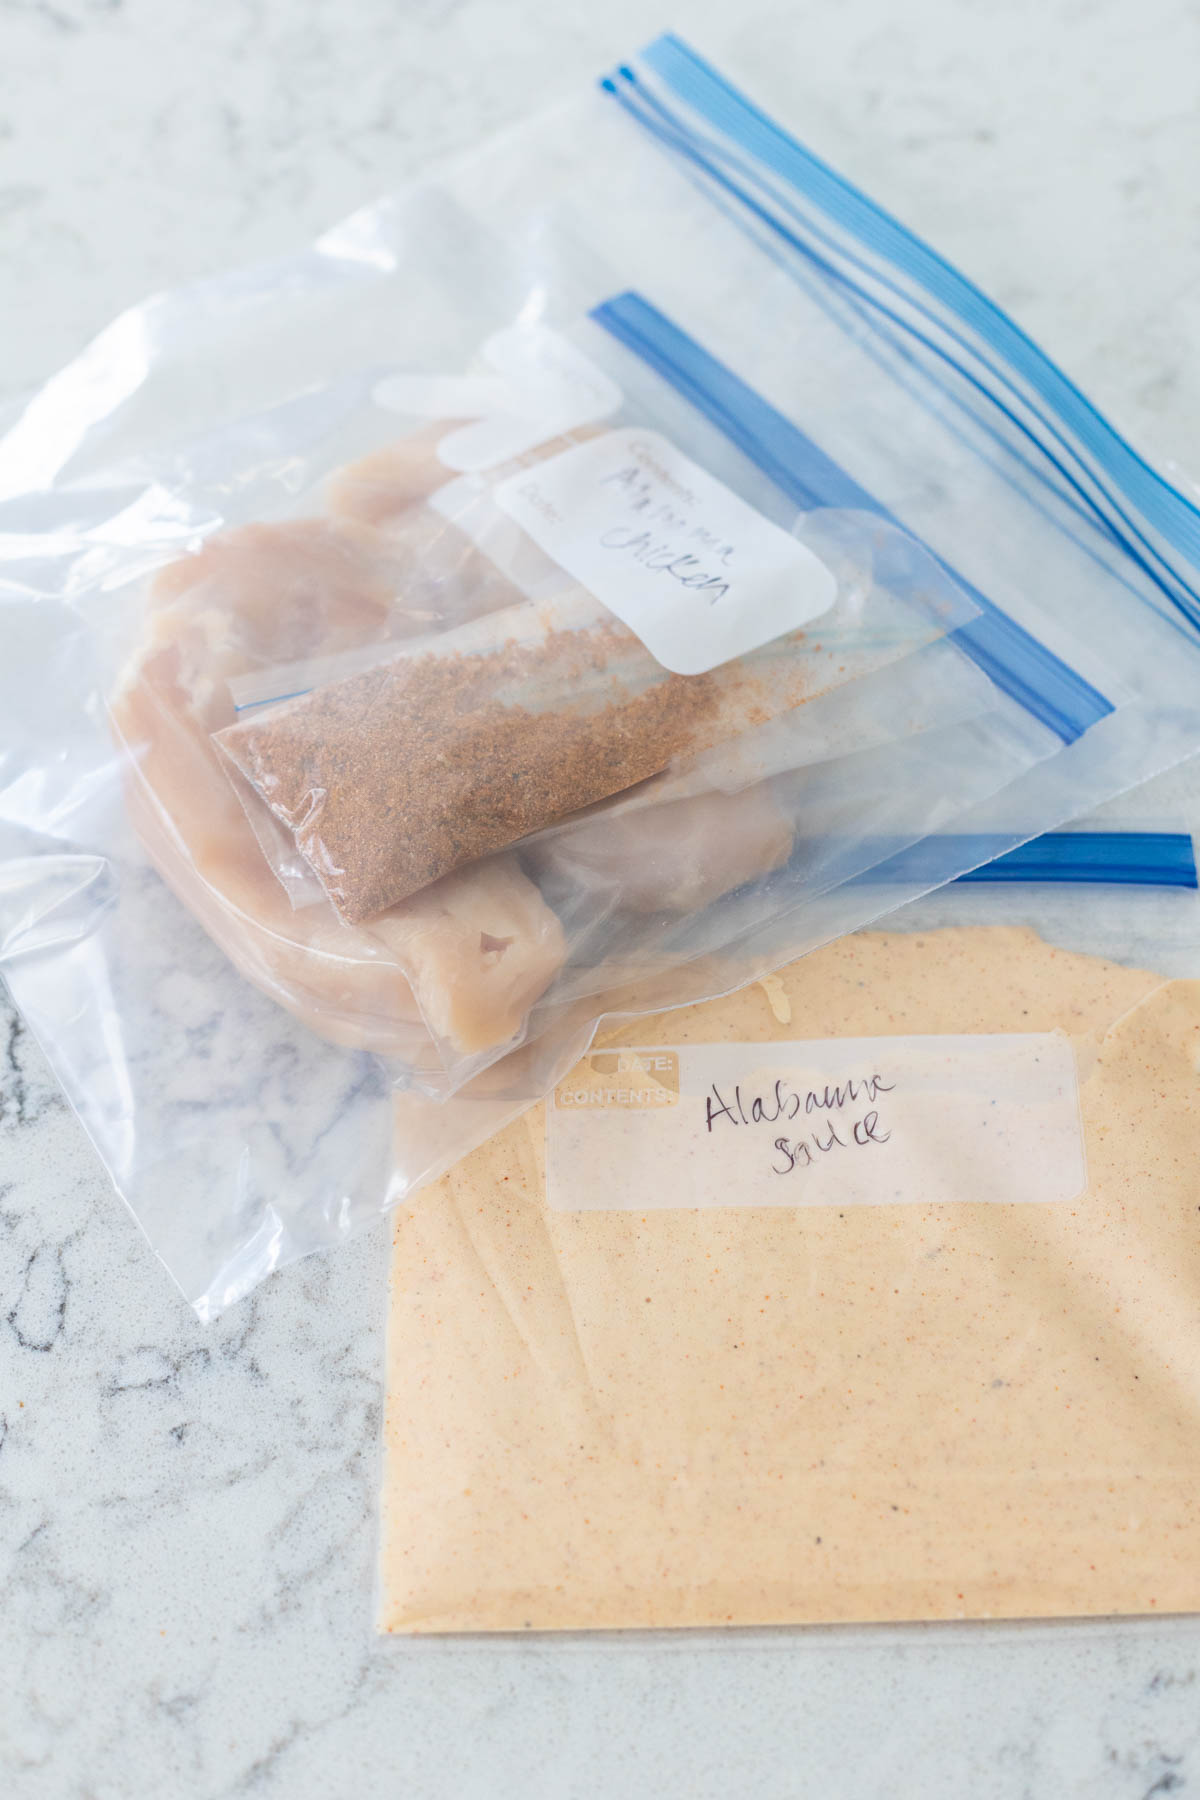 The chicken, seasonings, and Alabama white sauce have been packaged for the freezer.